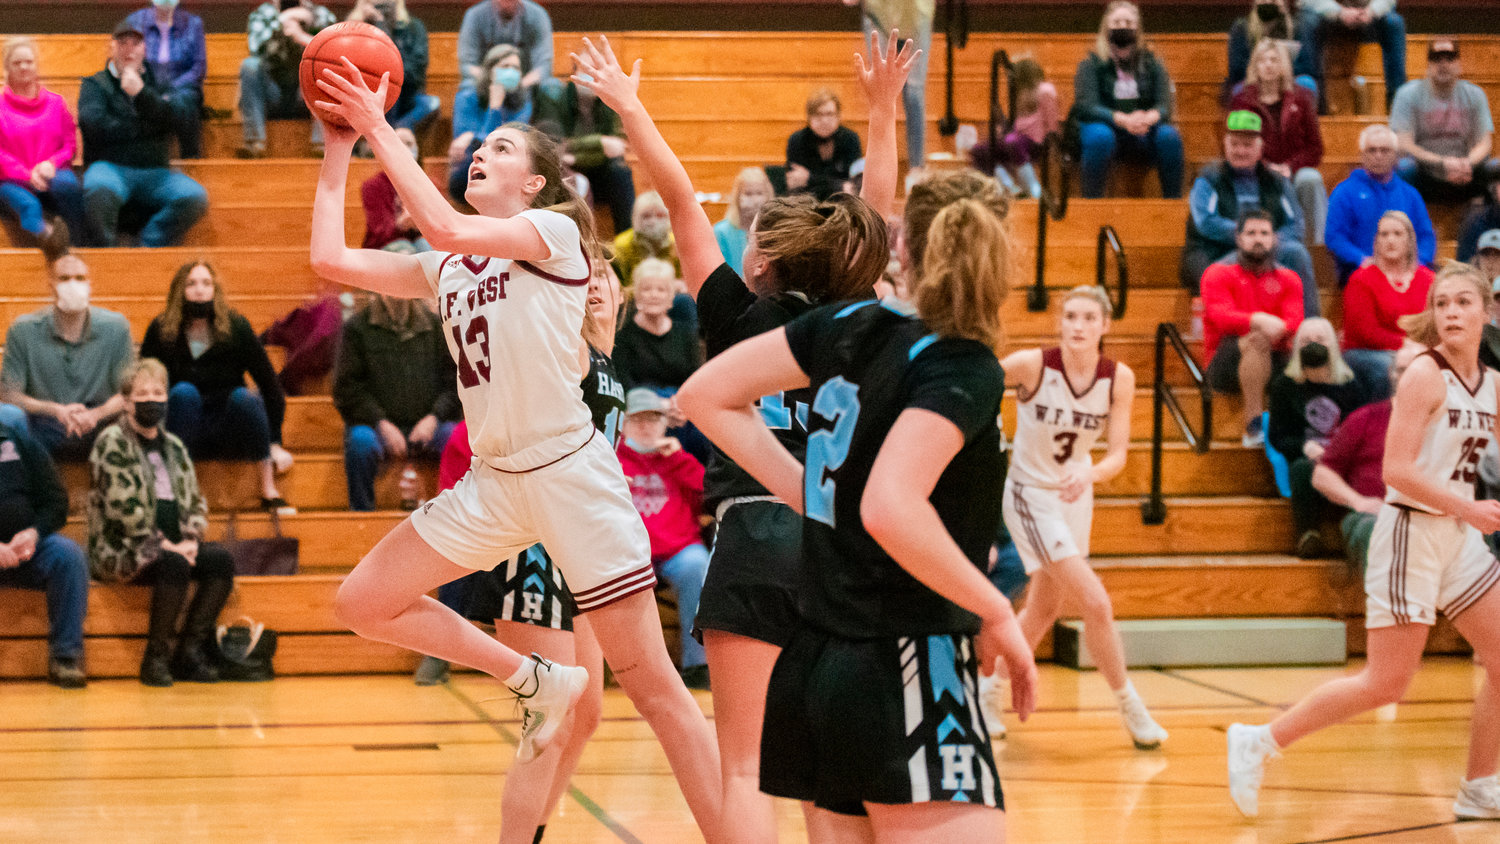 W.F. West senior Drea Brumfield (13) drives in to score during a game Friday night in Chehalis.